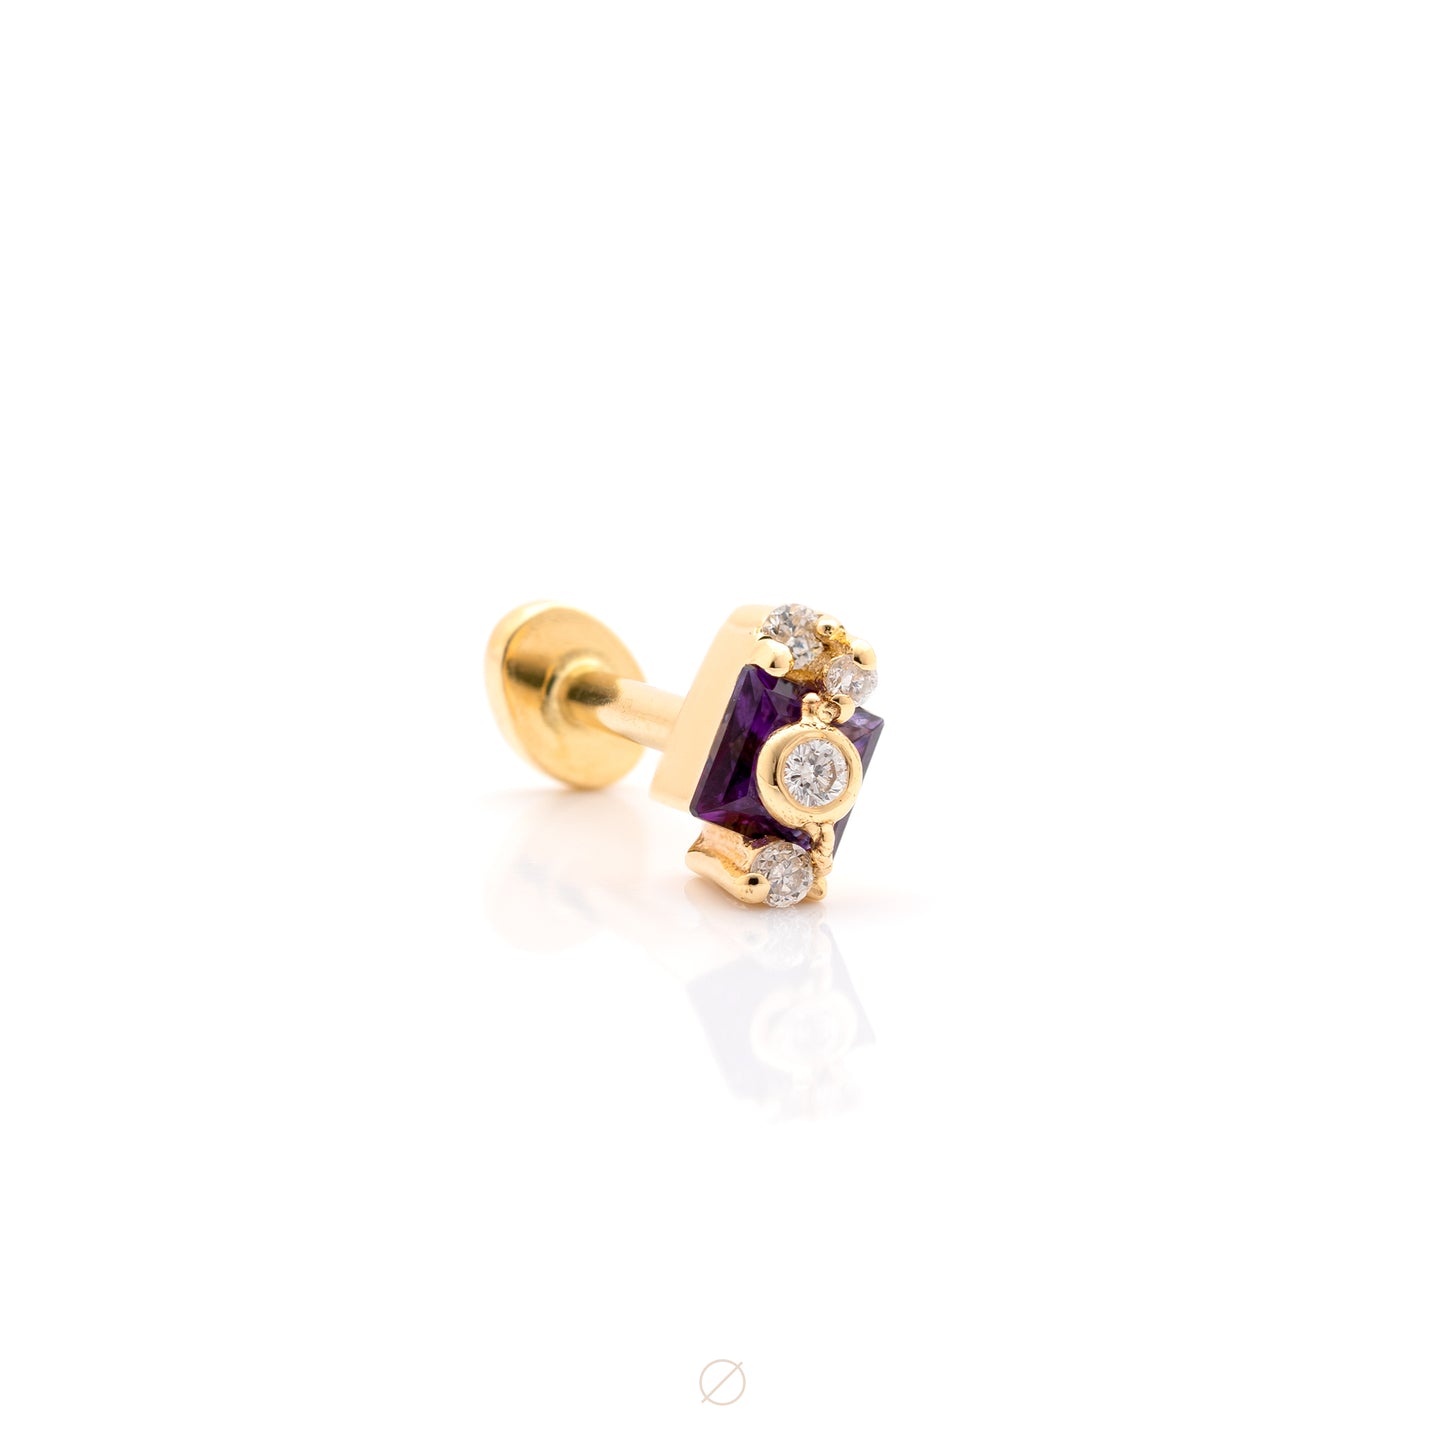 Abundance with Amethyst Complete Threaded Piece in Yellow Gold by Pupil Hall